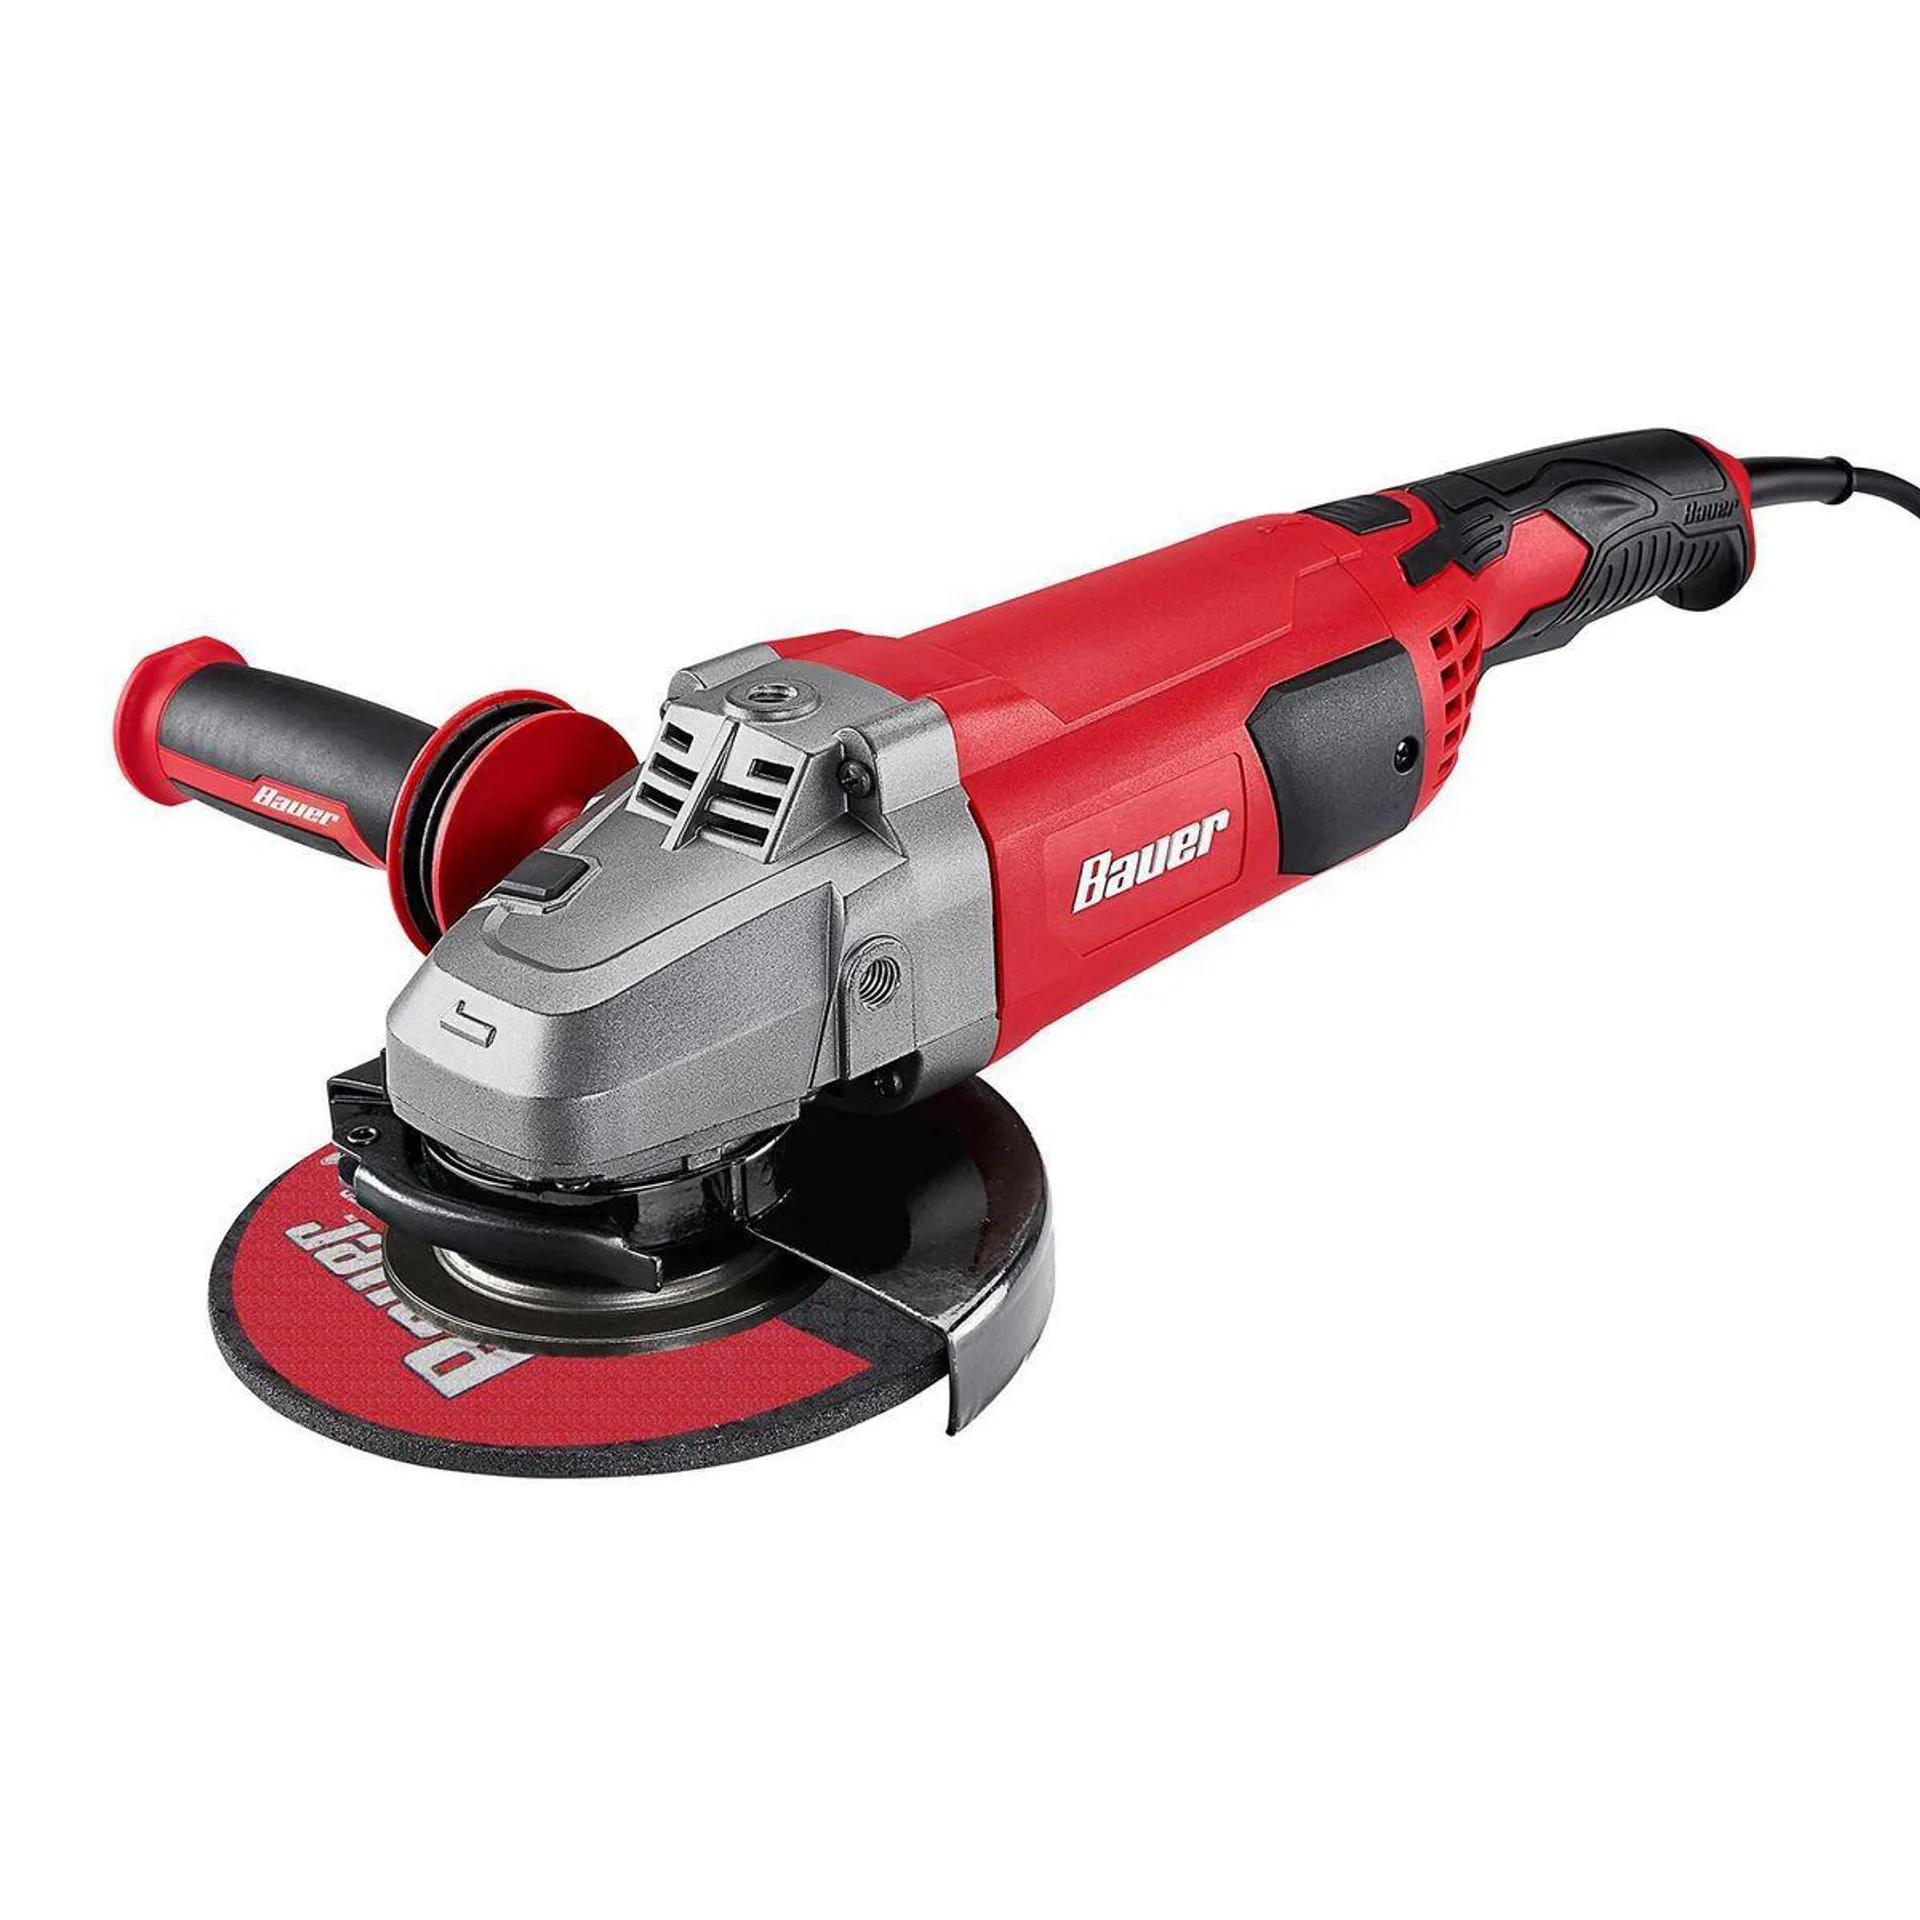 15 Amp 7 in. Trigger Grip Angle Grinder with 180° Rotating Body